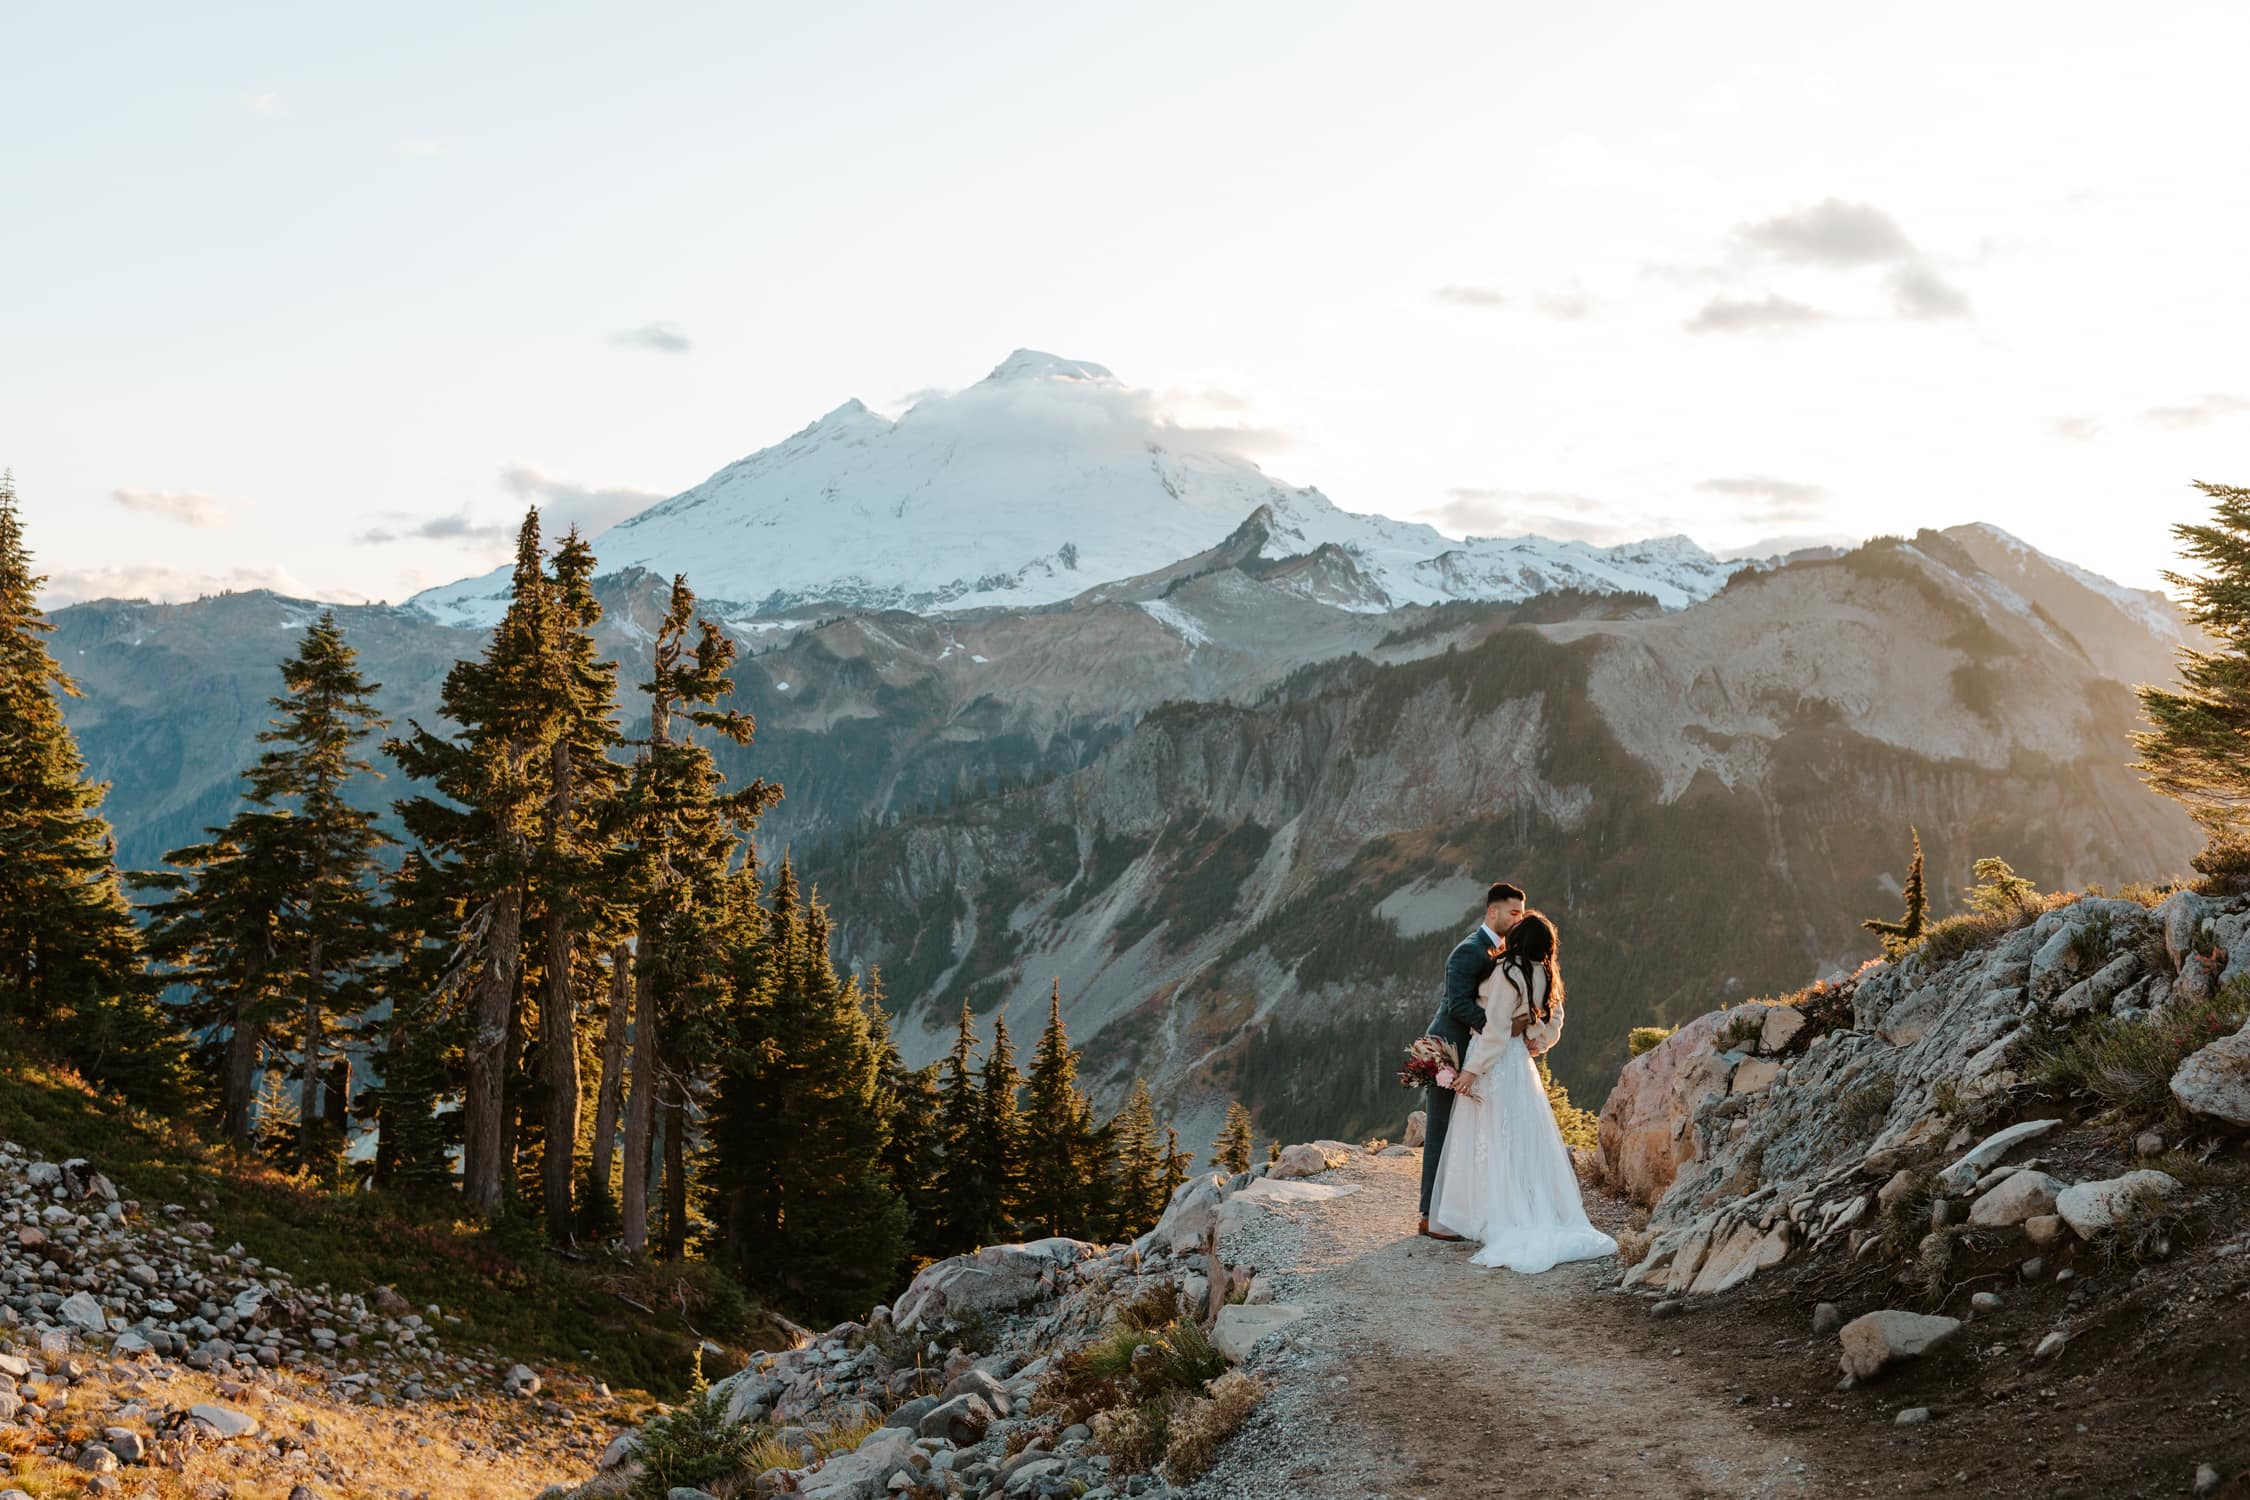 A couple in wedding attire kissing in front of Mt. Baker in the North Cascades.